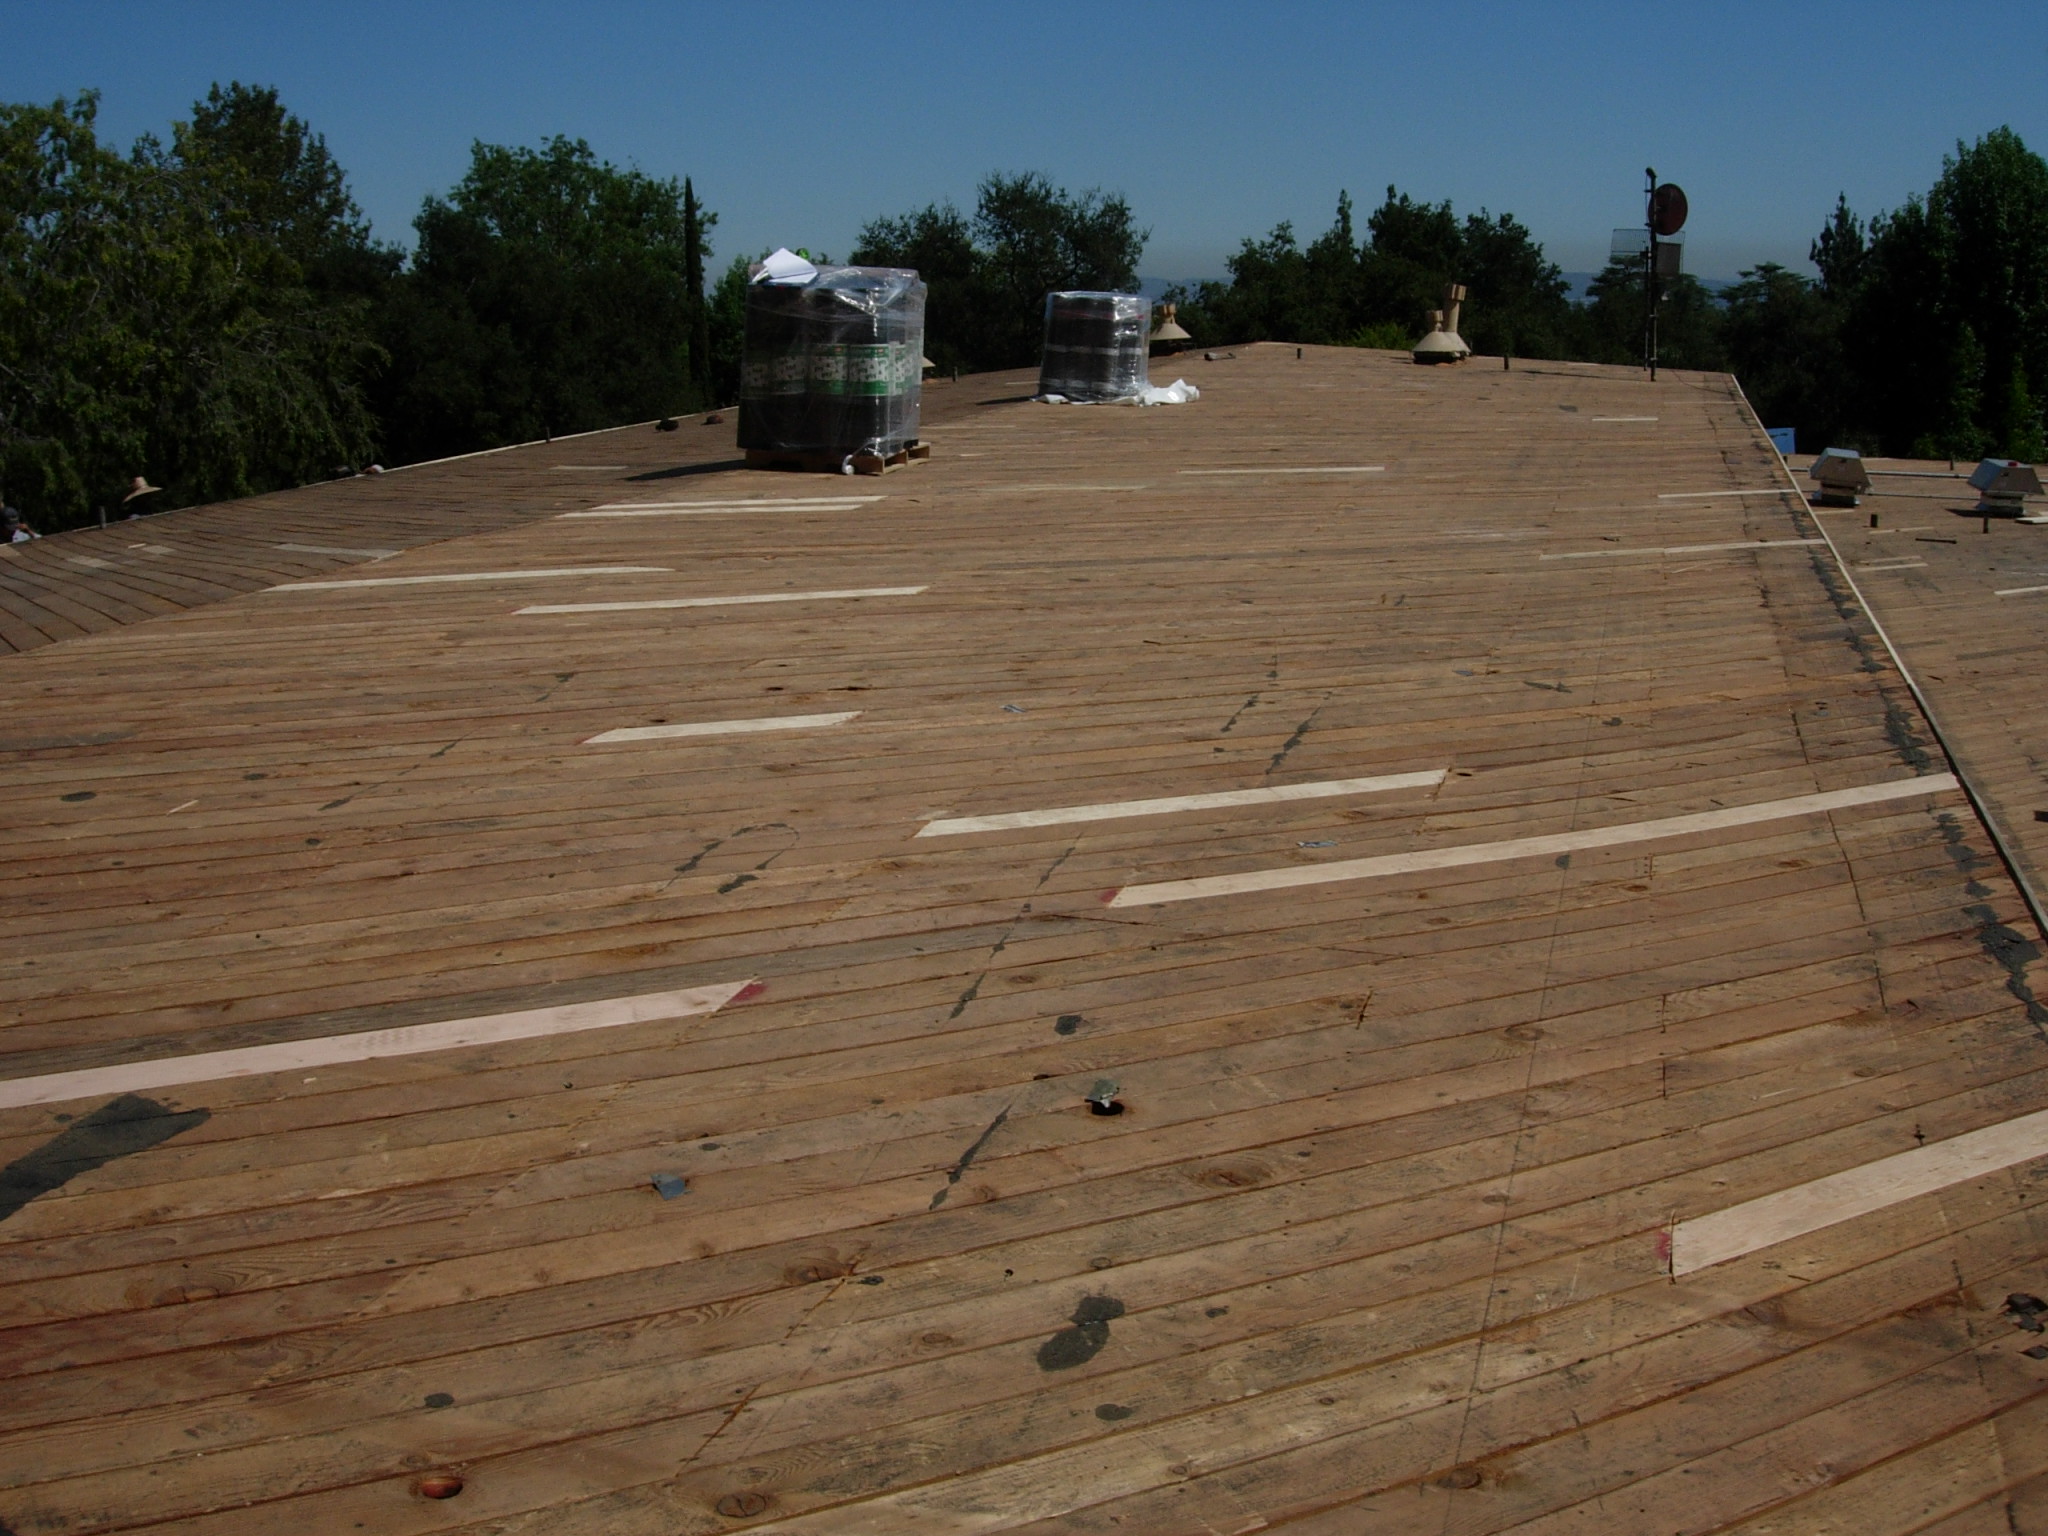 Commercial and Industrial Roof Maintenance and Repair | Commercial and Industrial Roof Maintenance and Repair in California | Commercial and Industrial Roof Maintenance and Repair in Nevada | Commercial and Industrial Roof Maintenance and Repair in Arizona